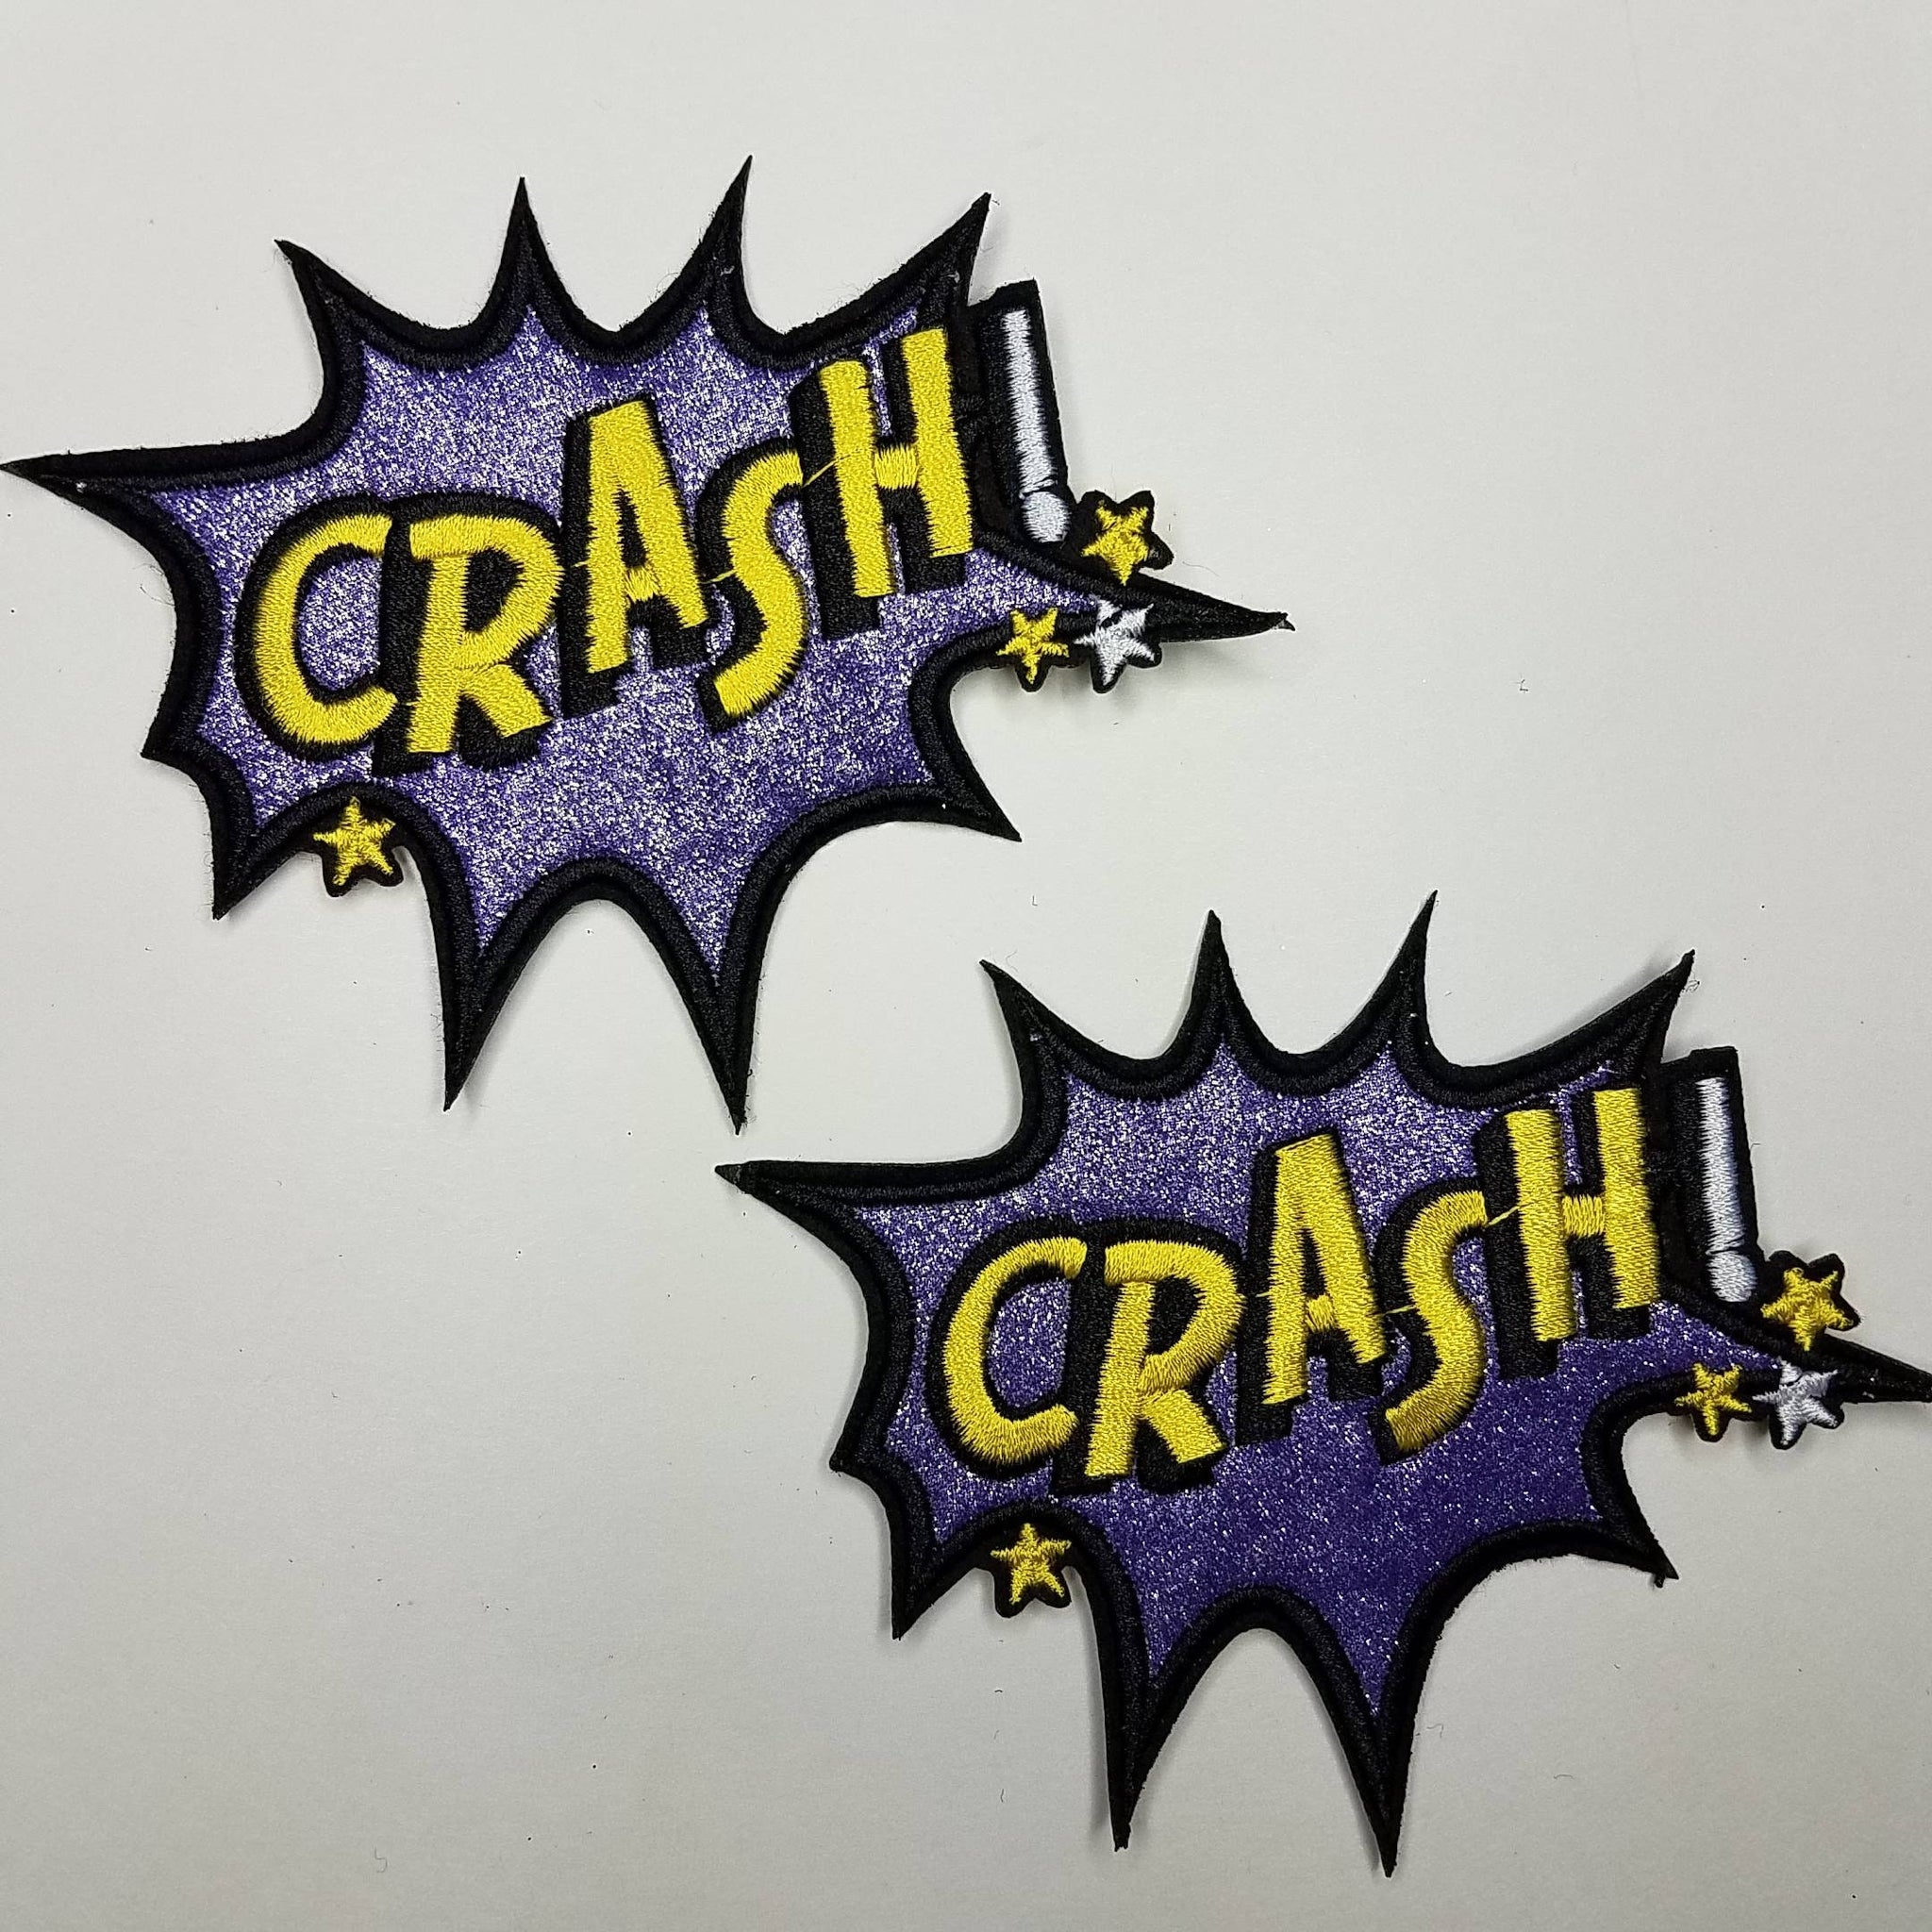 2-pc set, "Crash" Purple and Yellow Metallic Starburst Patch, 4"- inches,  Cool Appliques For Clothing, Medium Size Fun Embroidered Patches